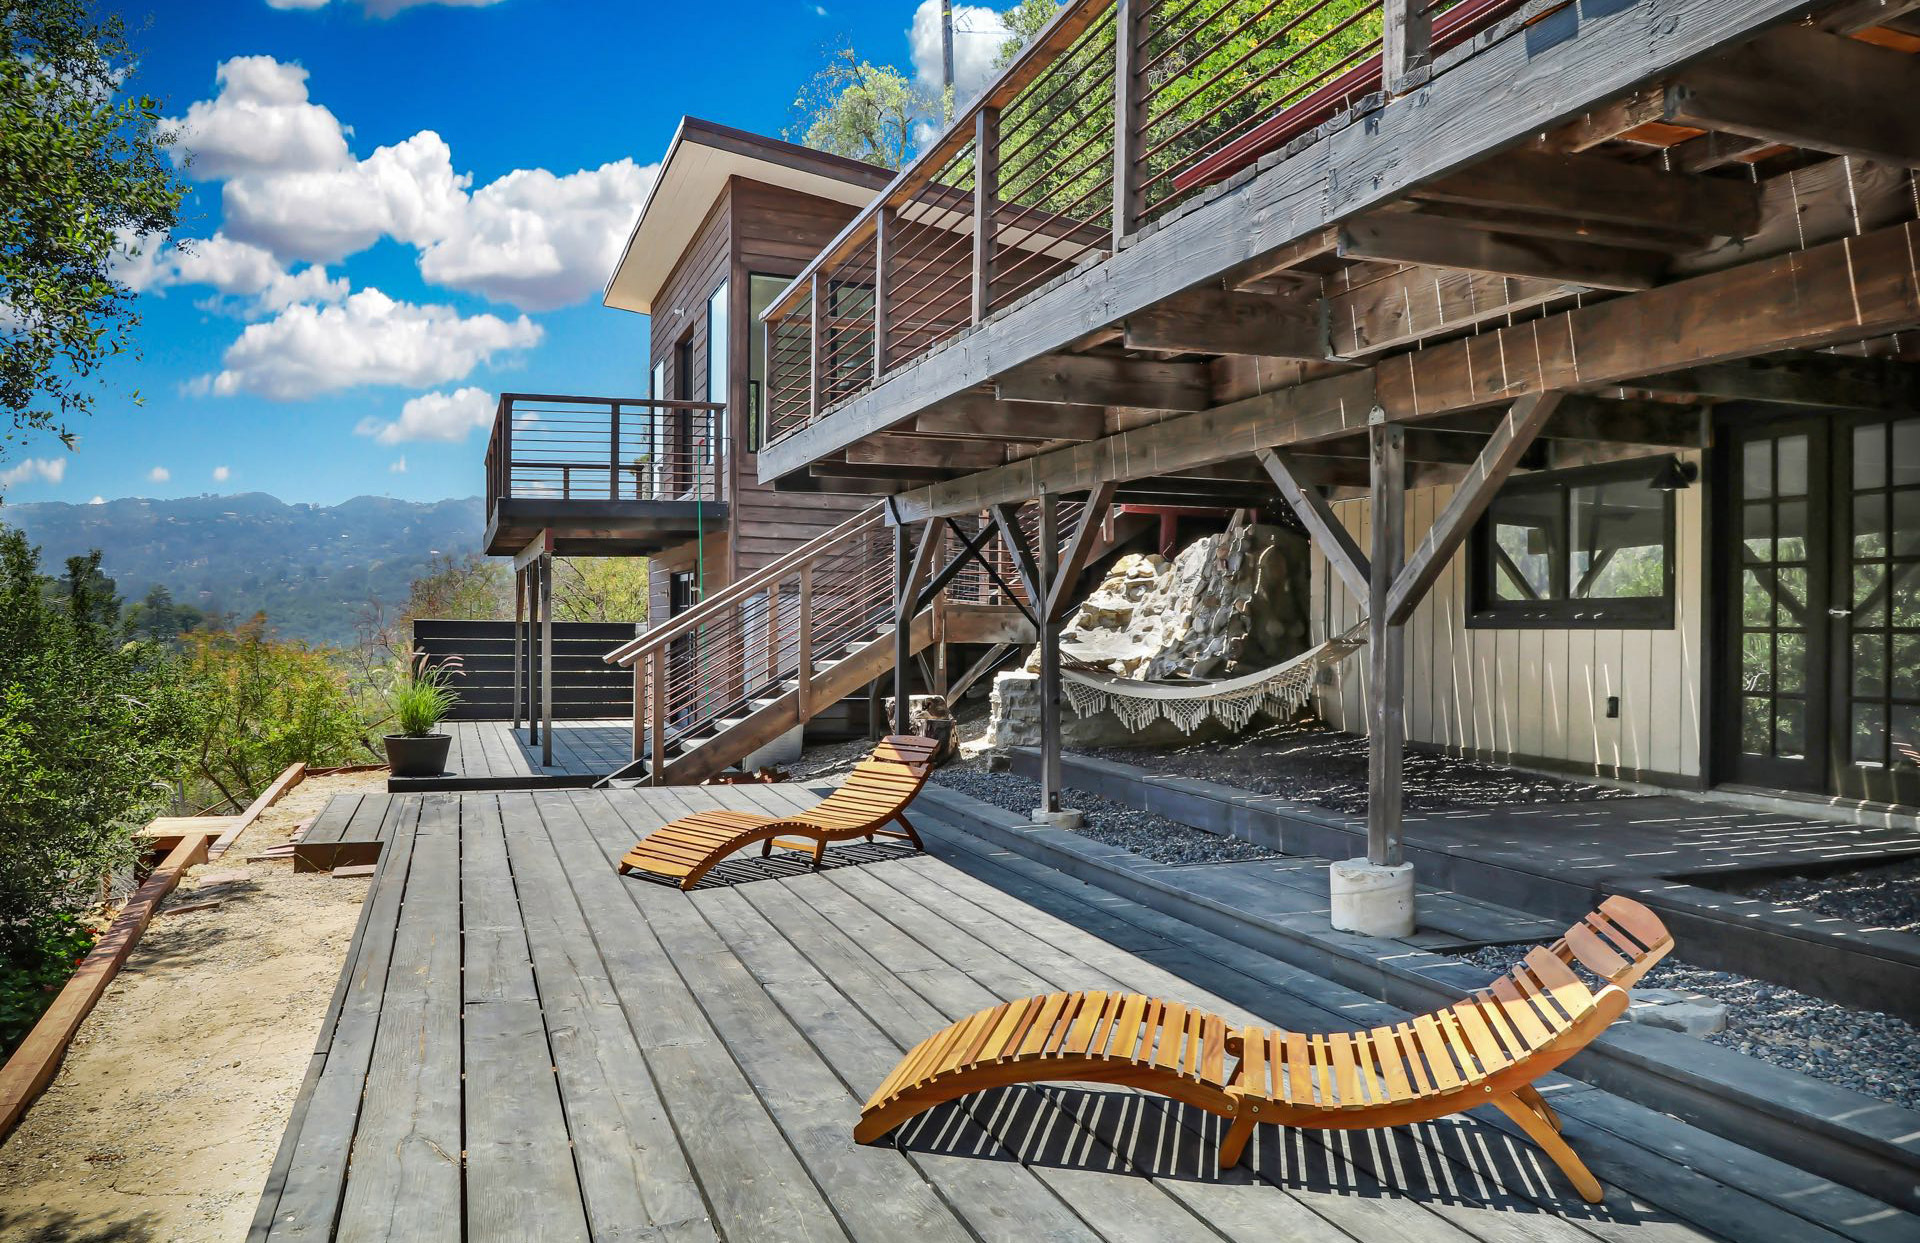 Hilltop cabin in LA County’s Topanga lists for $995k